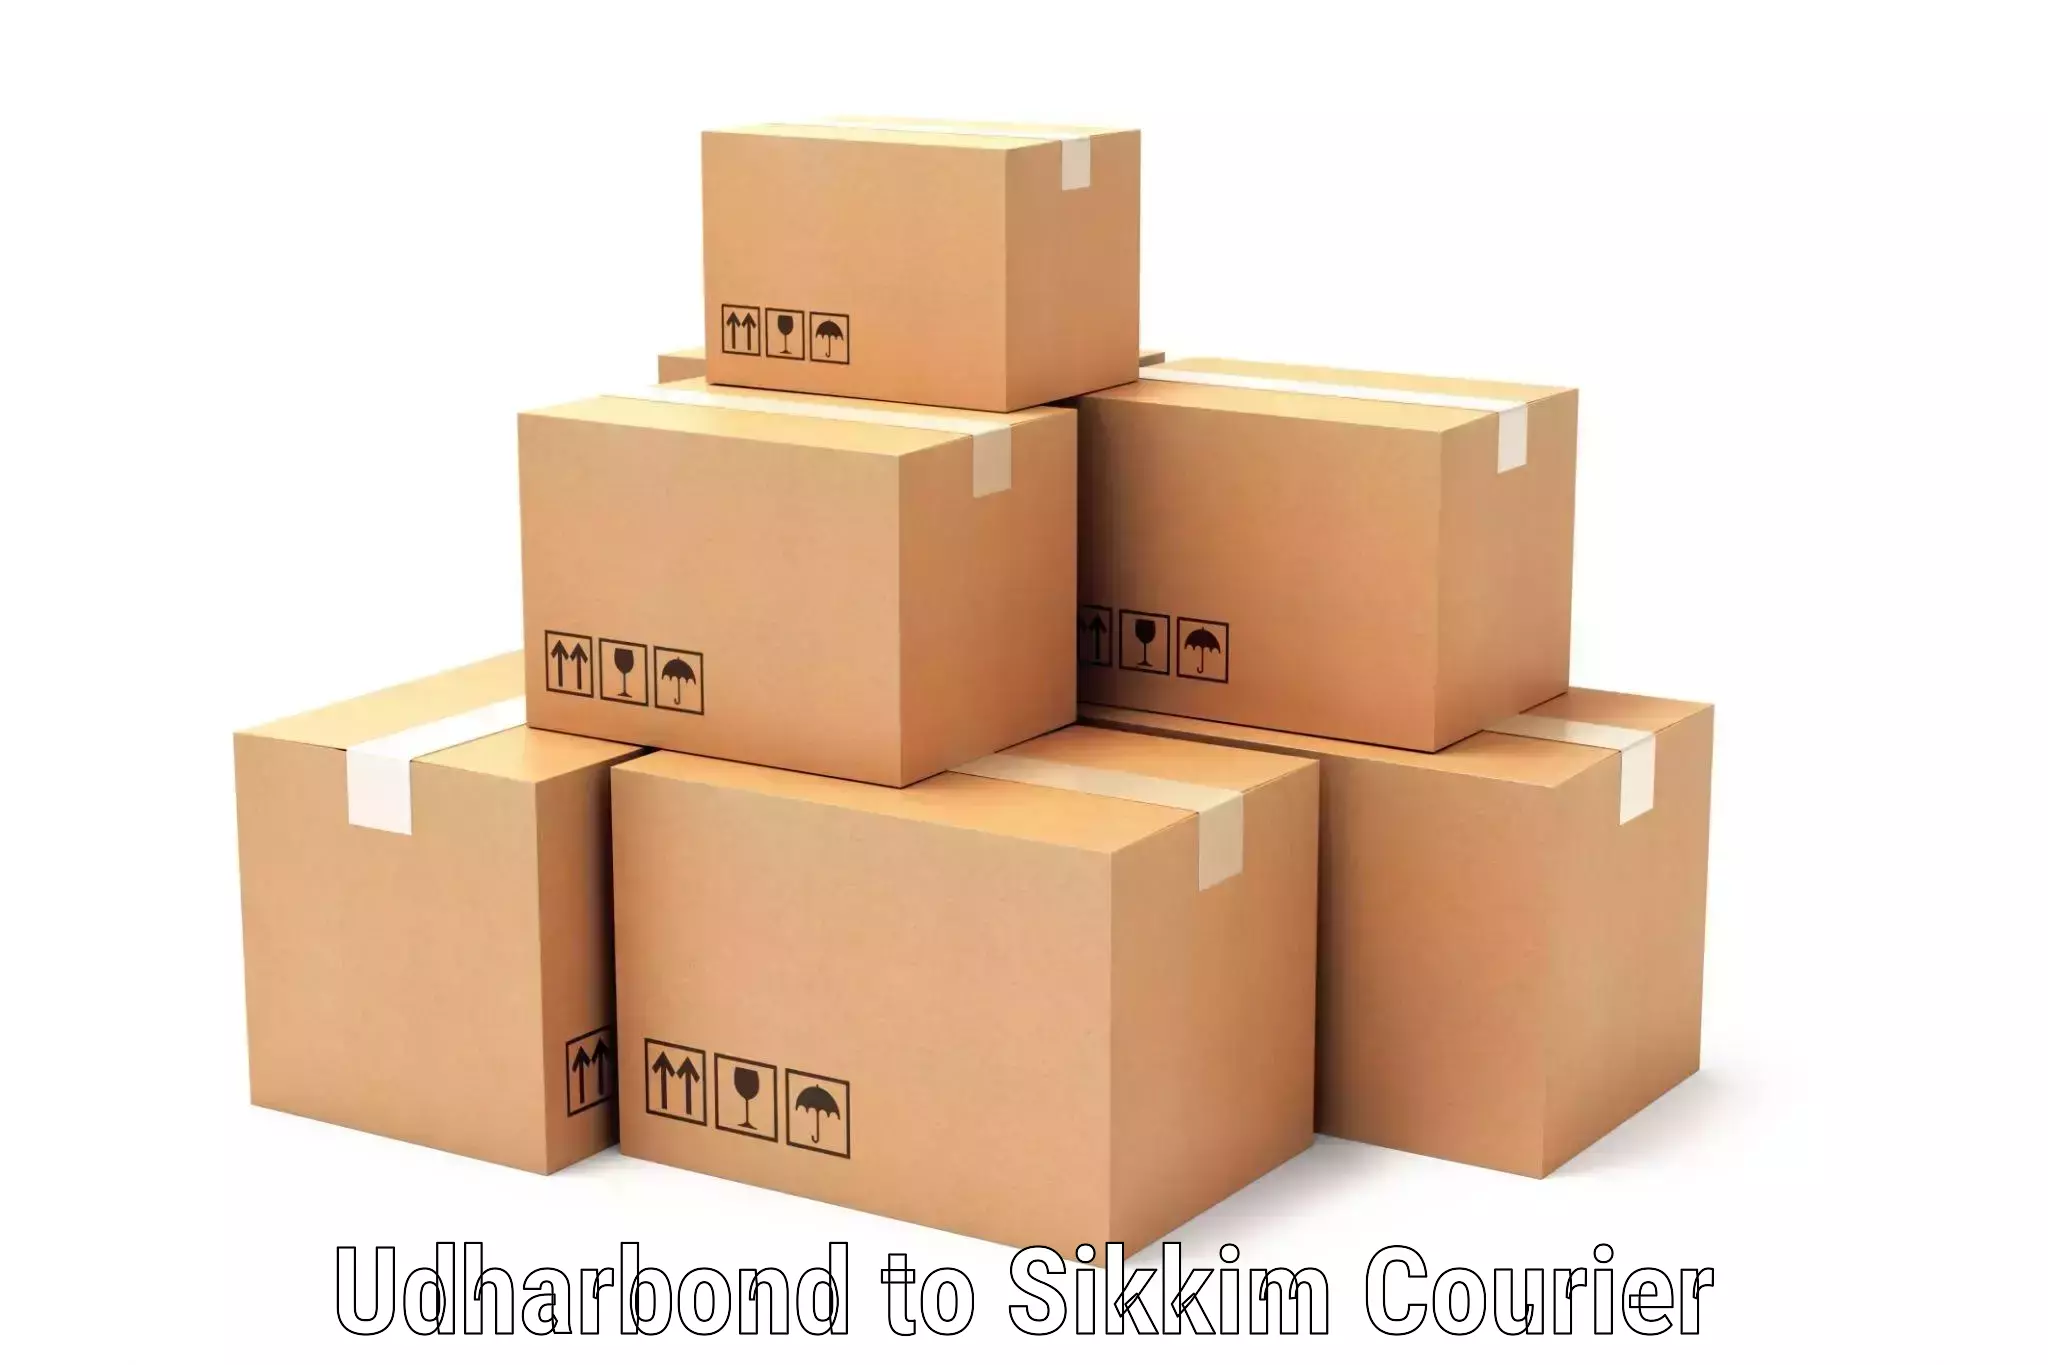 Package consolidation Udharbond to Sikkim